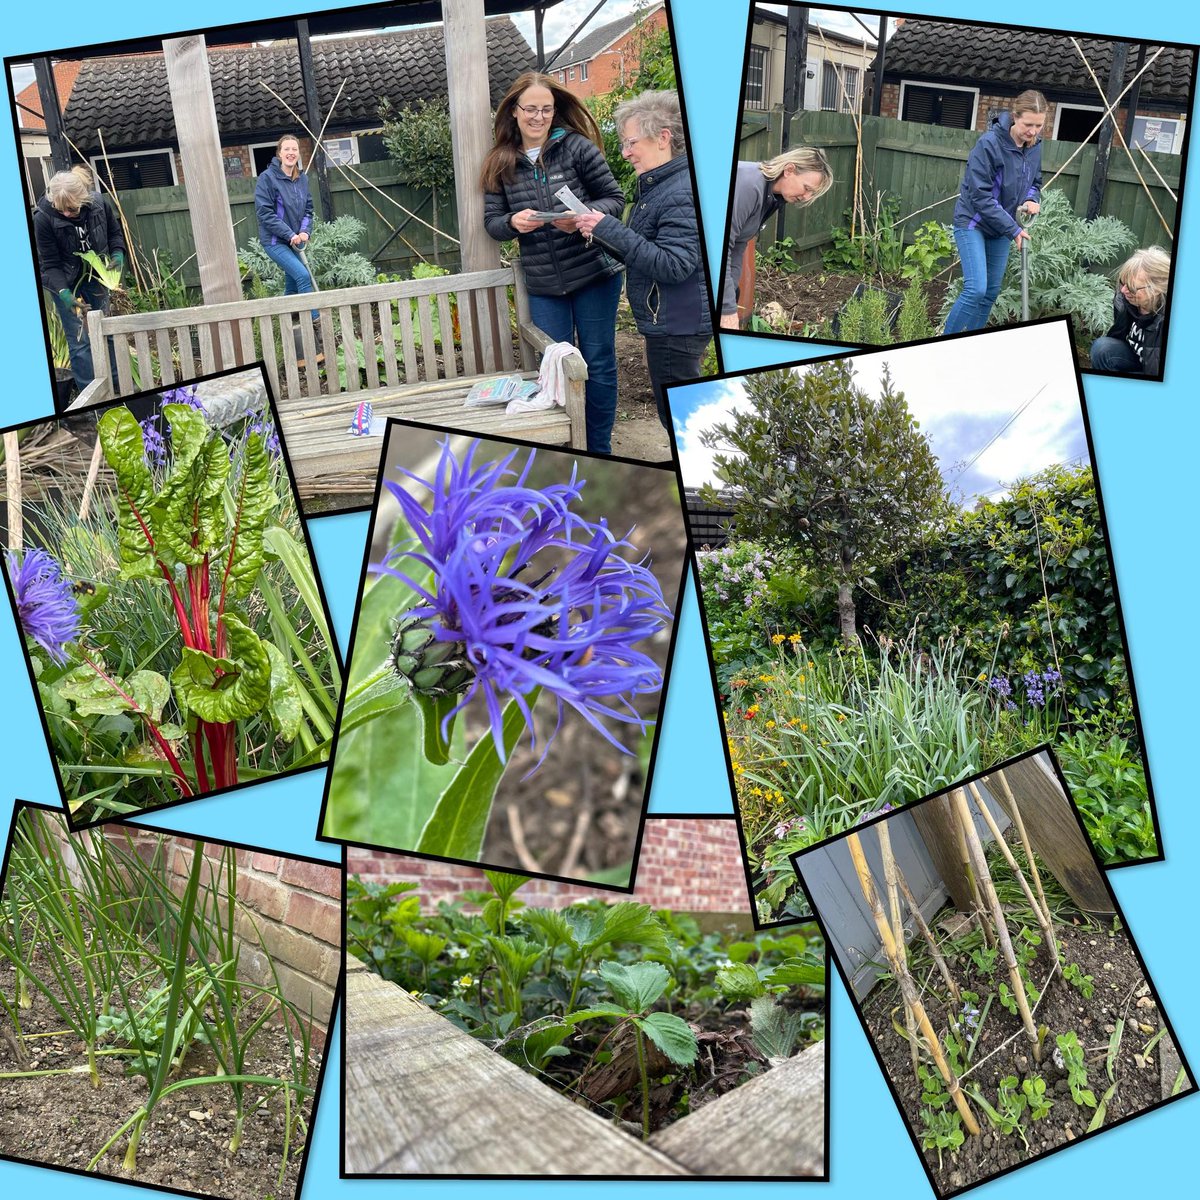 Communuty Garden @TheButterfield1 If you'd like to volunteer (even just an hour a month) contact them directly on enquiries@thebutterfield.org.uk @coopuk have donated a children's gardening pack & will provide cakes for the next garden event #communitygardening #GoodToGrow2024